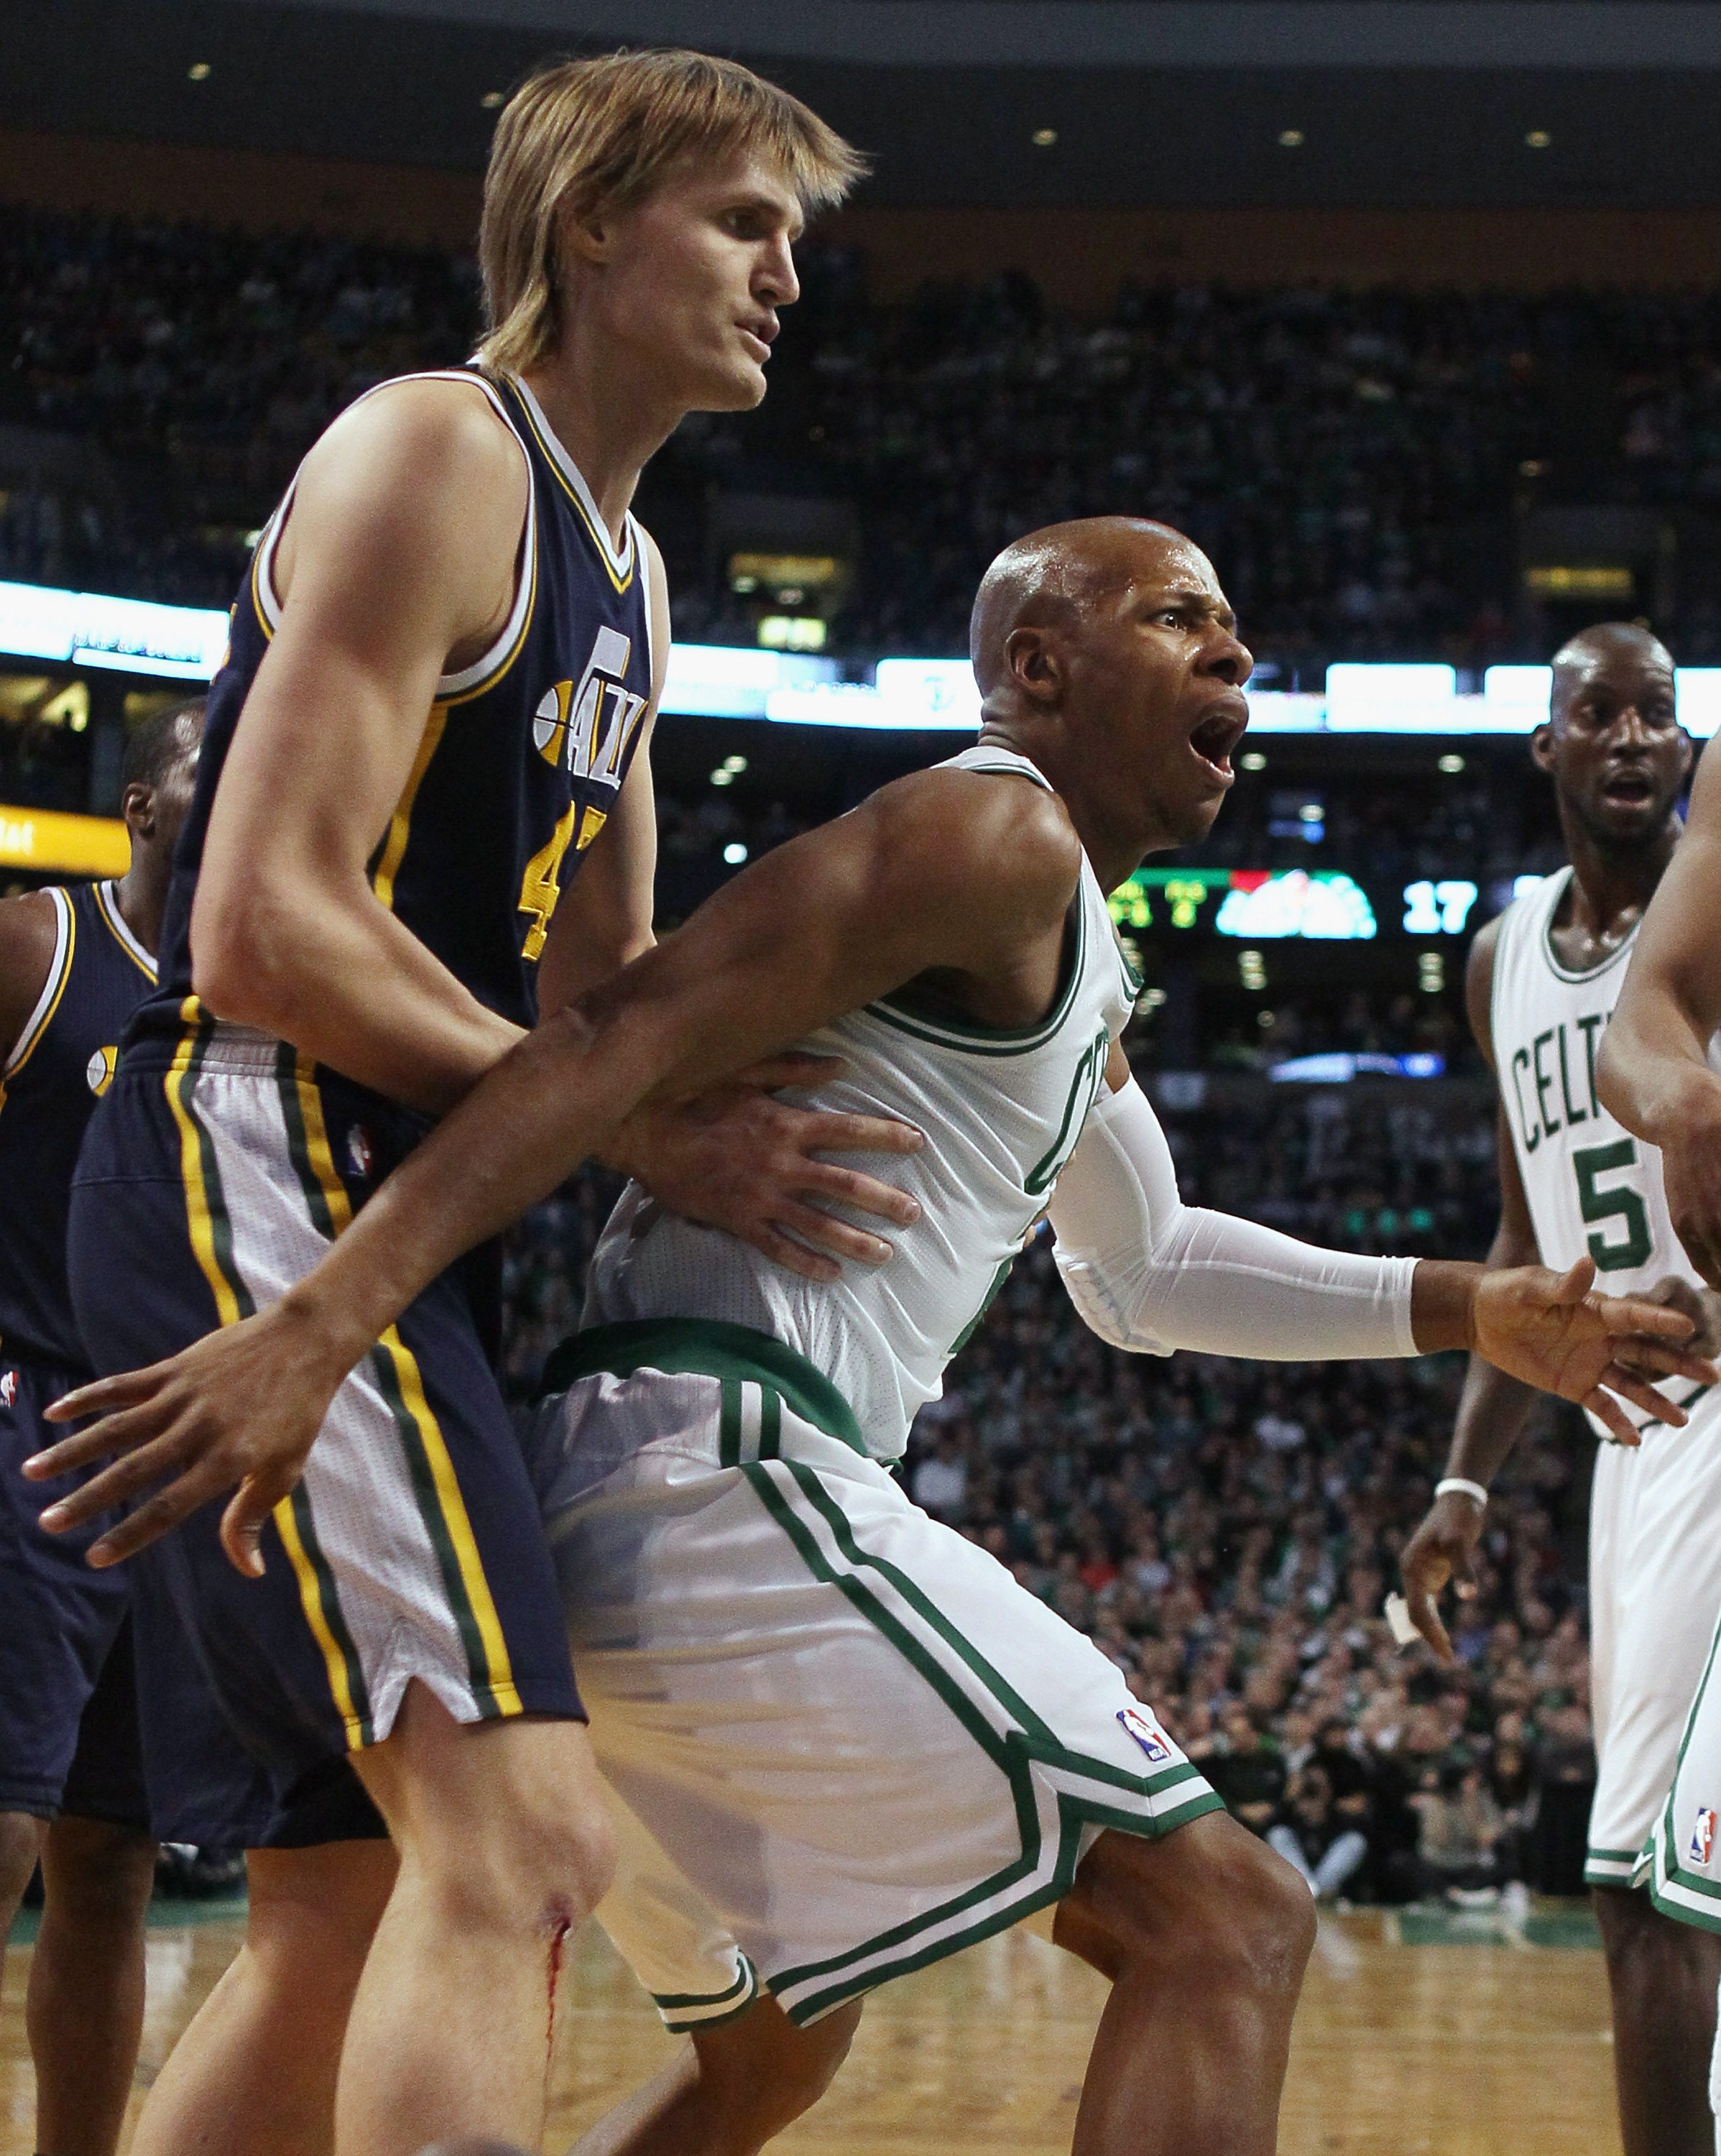 Jermaine O'Neal hopes to get rolling after slow start with Celtics